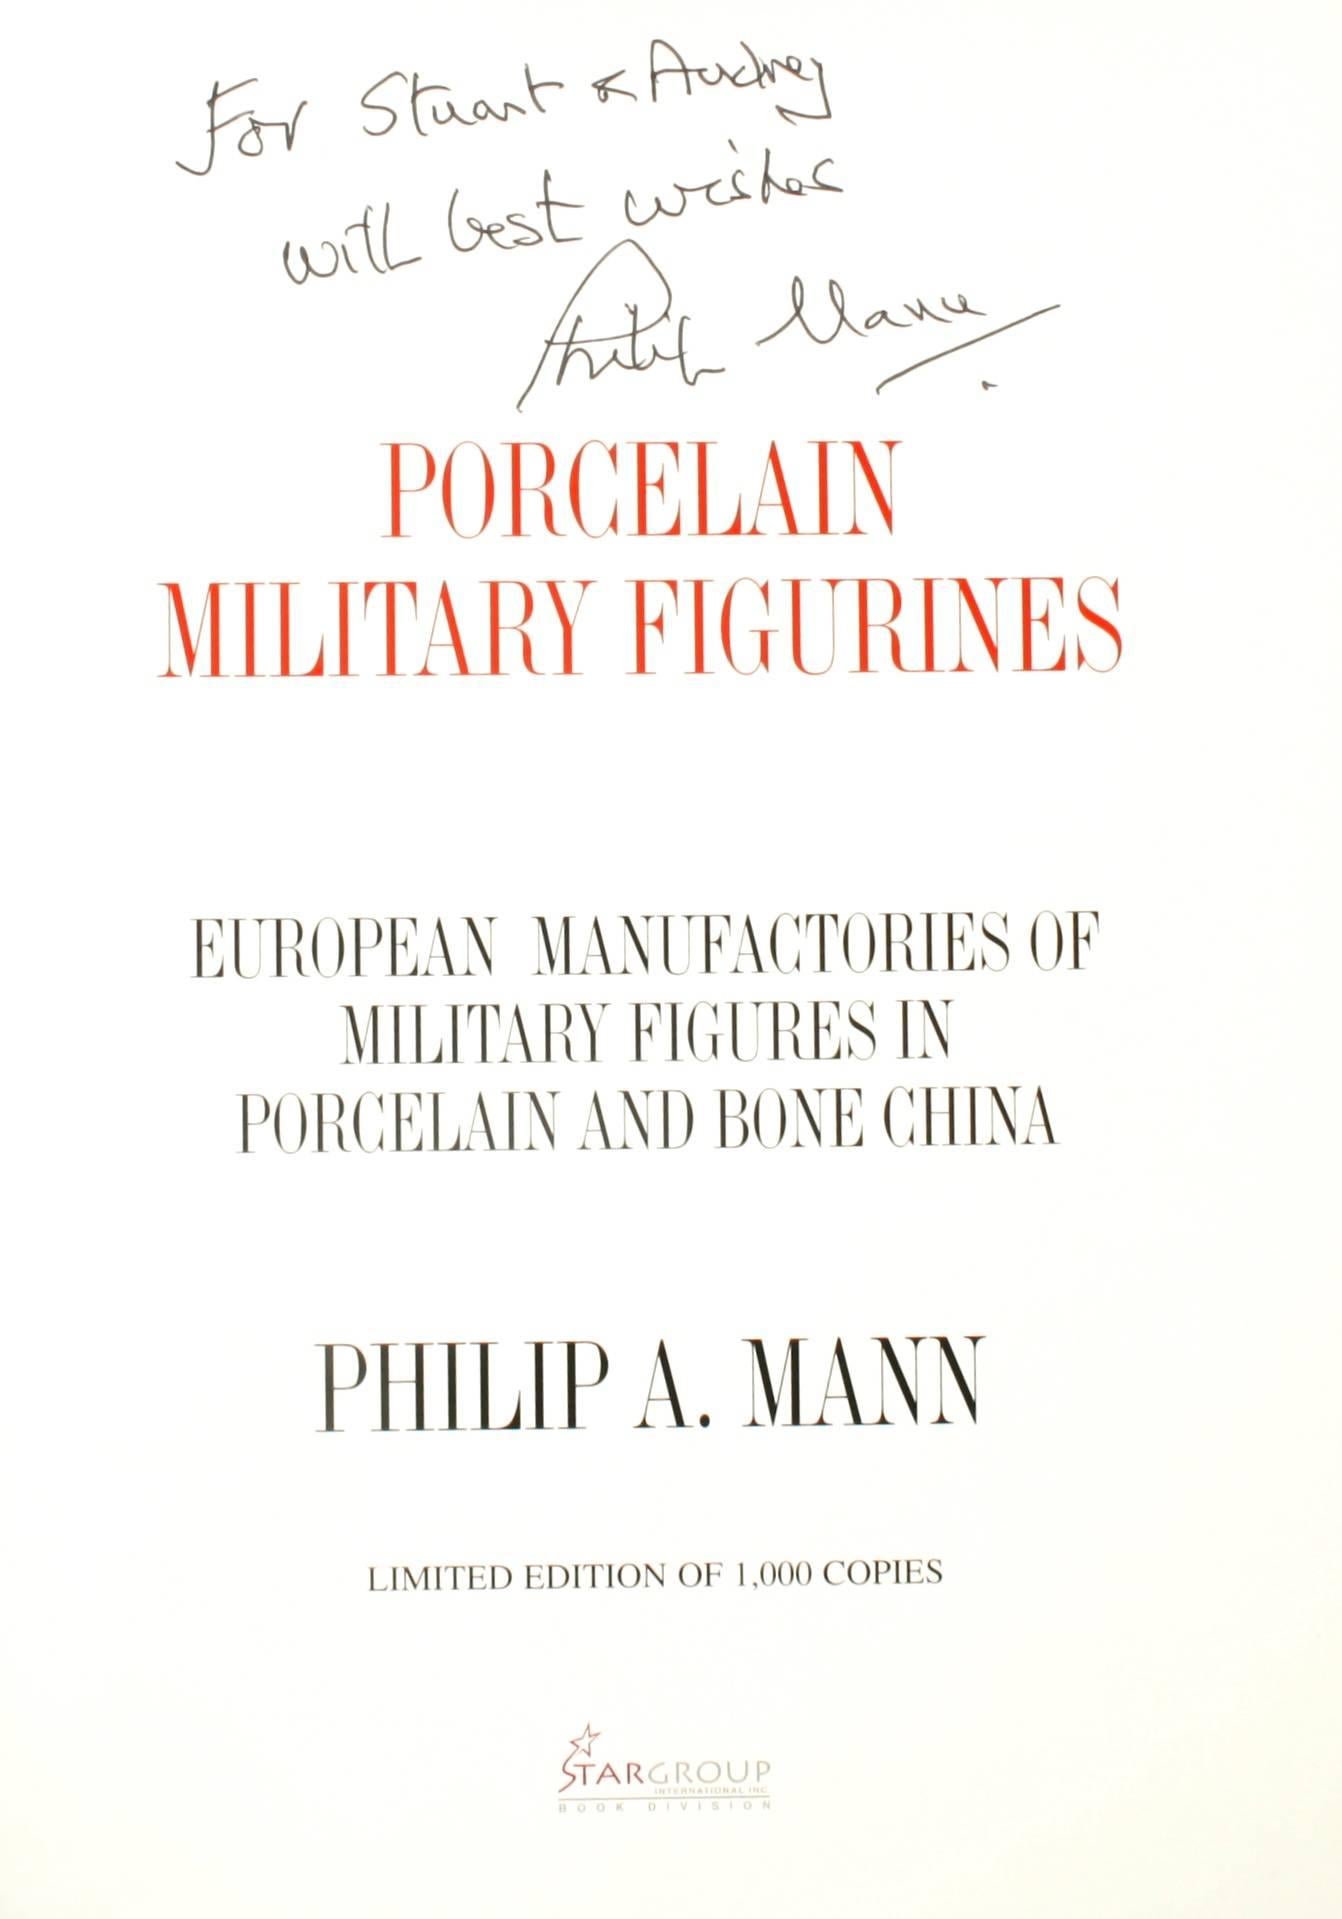 Porcelain Military Figurines, A Descriptive Reference Guide by Philip A. Mann. West Palm Beach: StarGroup International, Inc., 2004. Stated first edition signed by the author hardcover with dust jacket. 234 pp. This beautiful book is one of the only